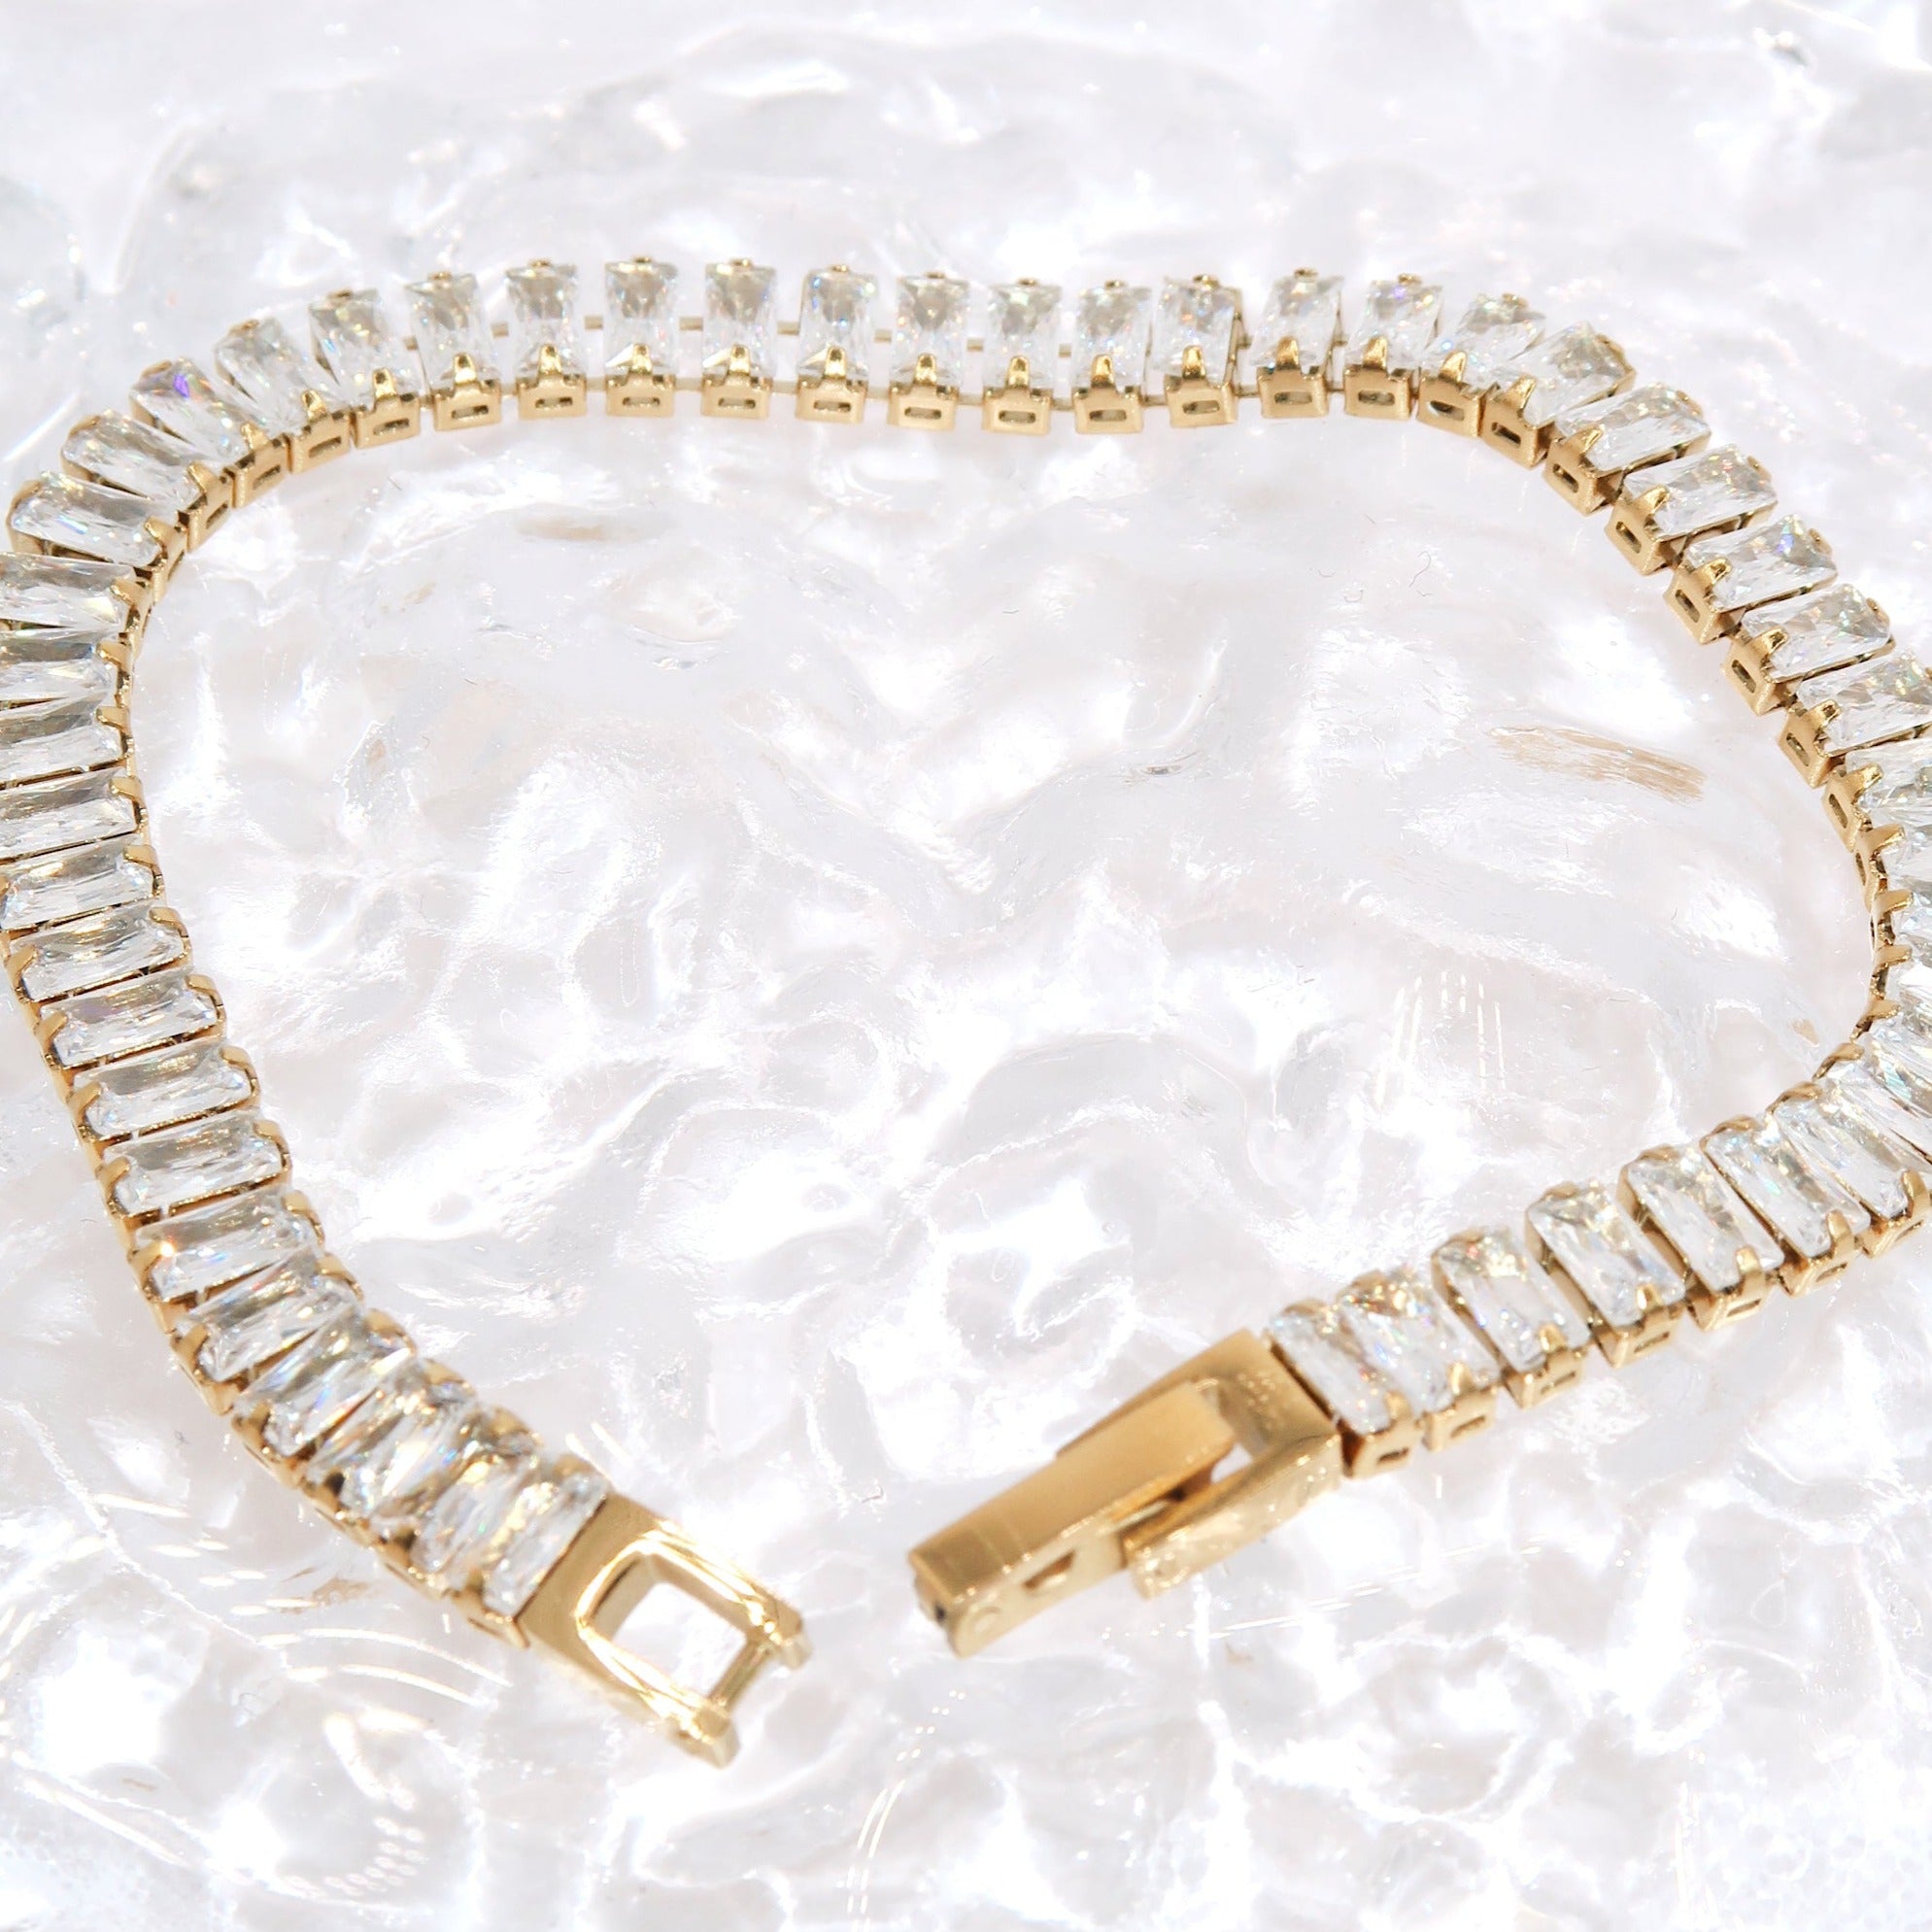 MIMI - 18K PVD Gold Plated Bracelet with Rectangular CZ Stones - Mixed Metals